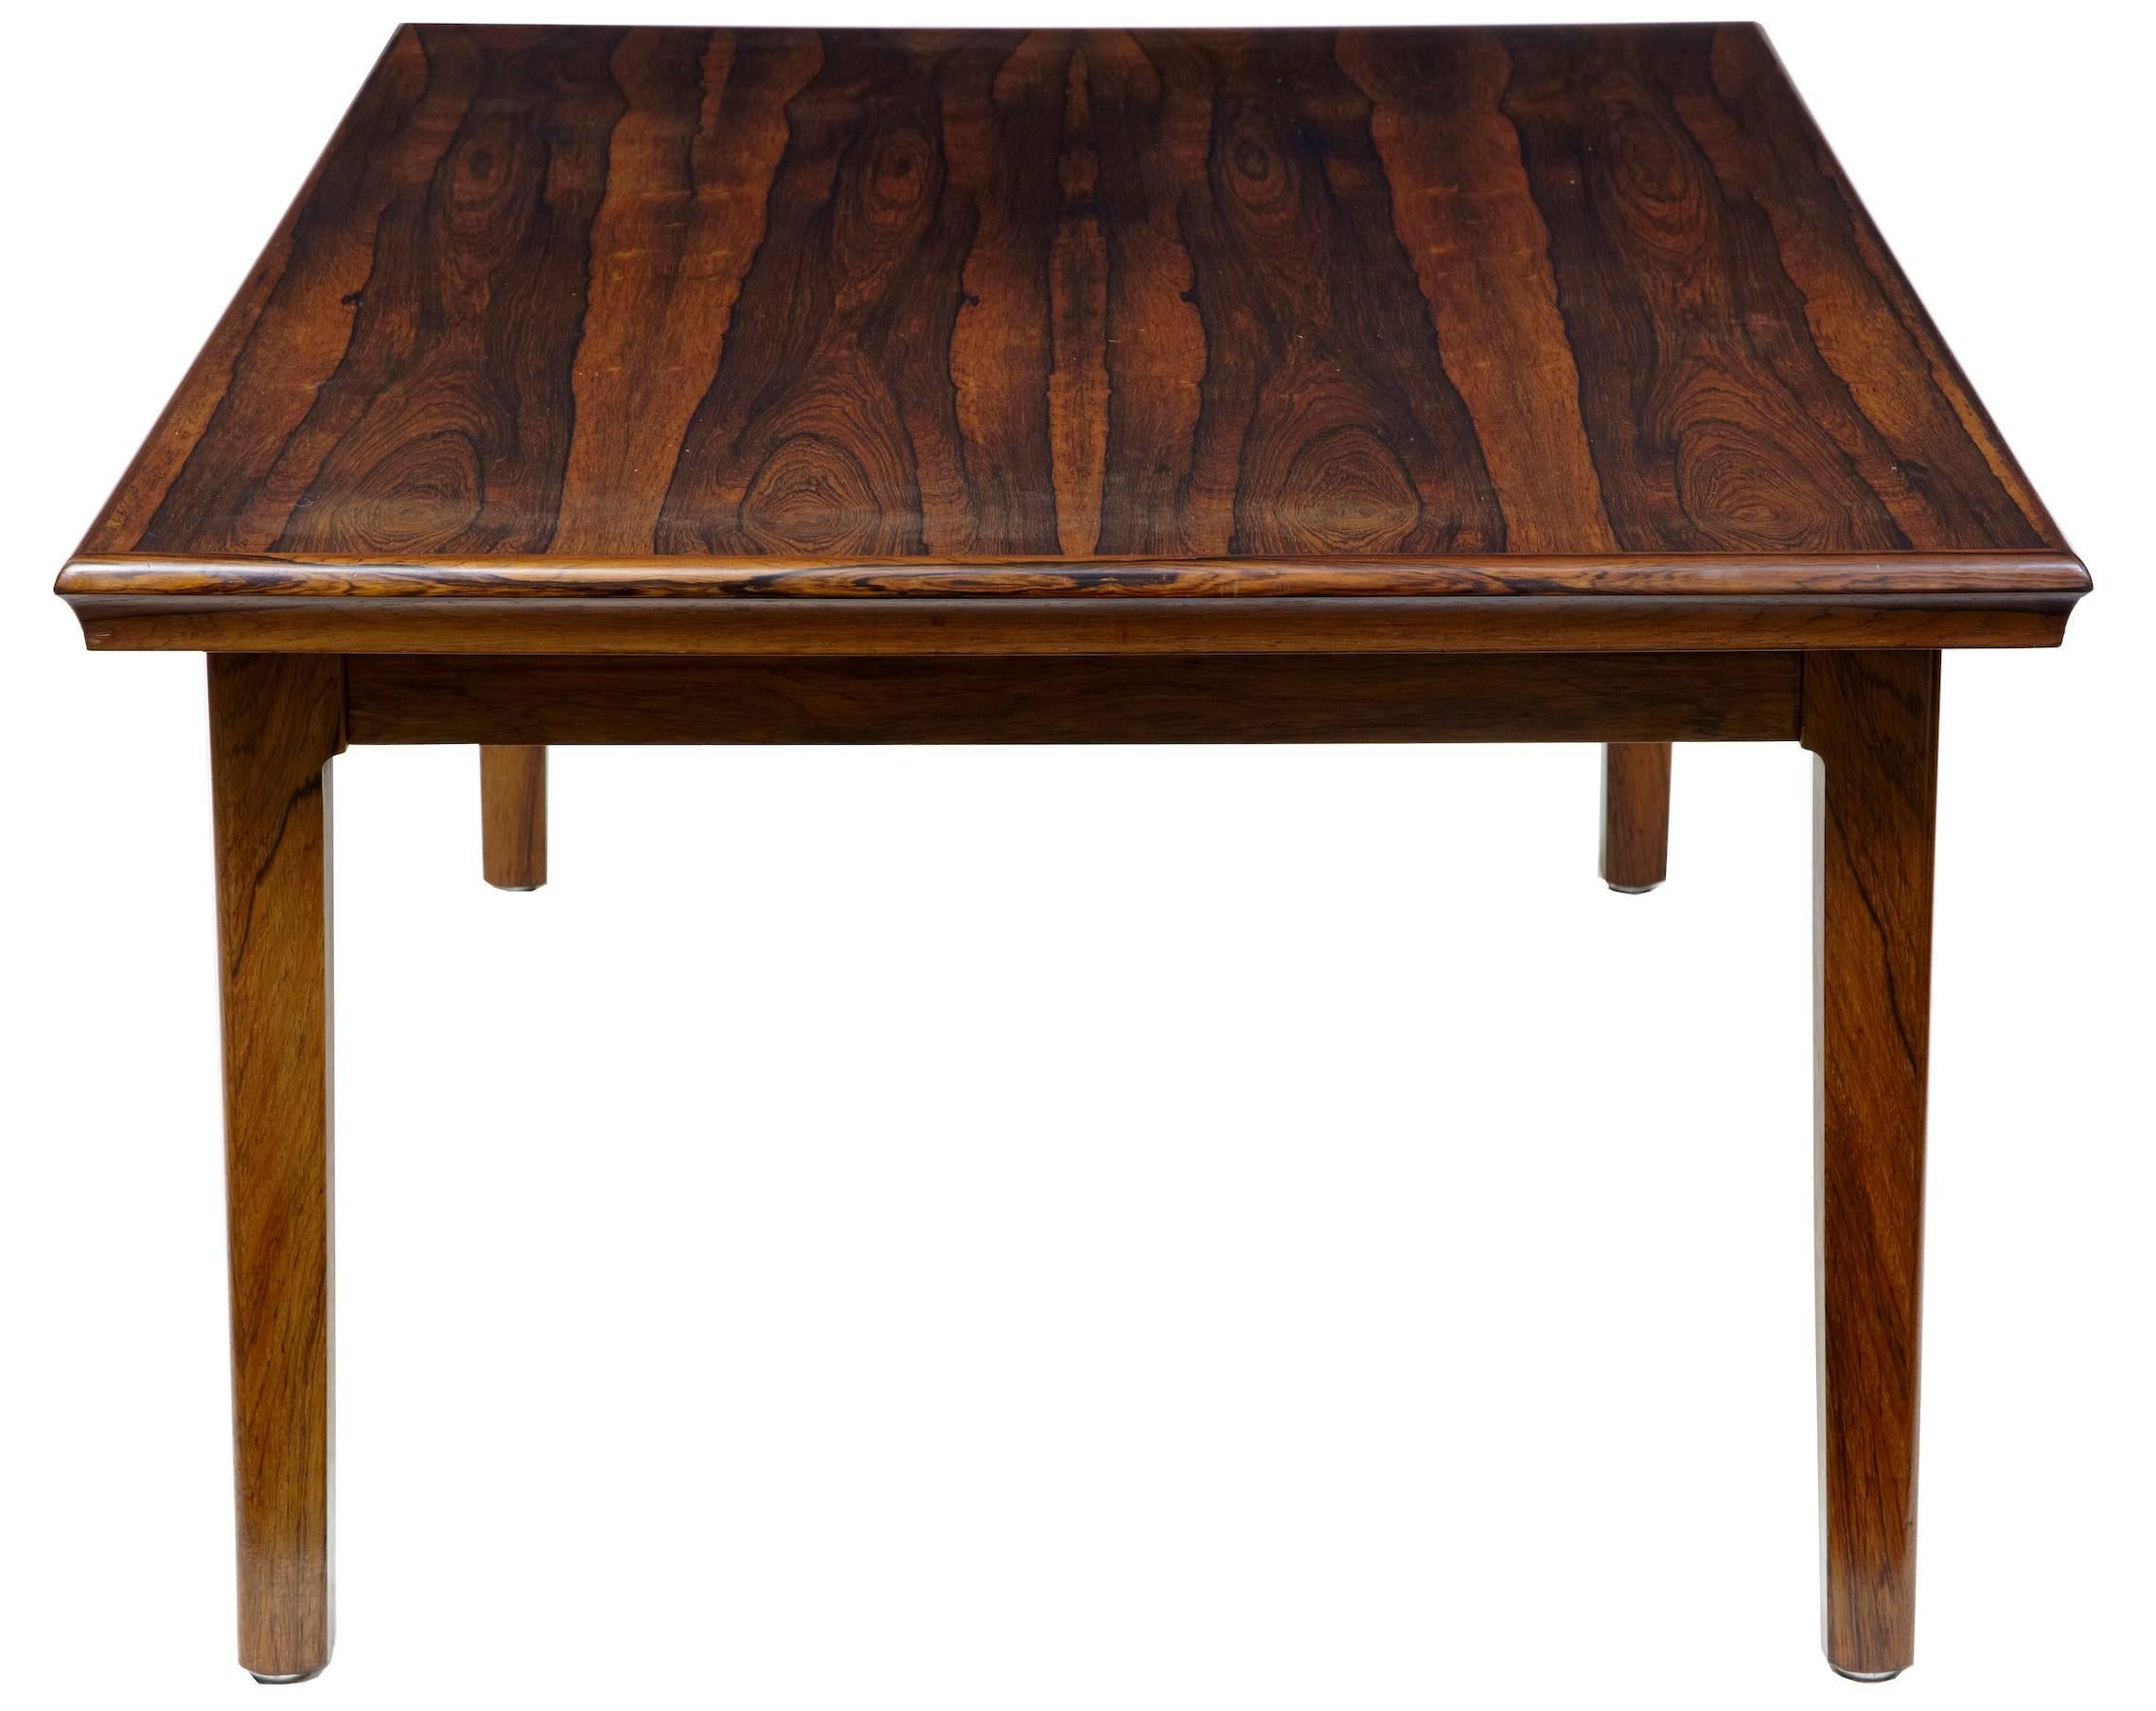 Rosewood coffee table, circa 1960. For some reason unknown to us, this table is fitted with a mechanism that lifts up the height by a few inches. Slight bloom on the surface, but otherwise in excellent order

Measures: Height: 20 1/2